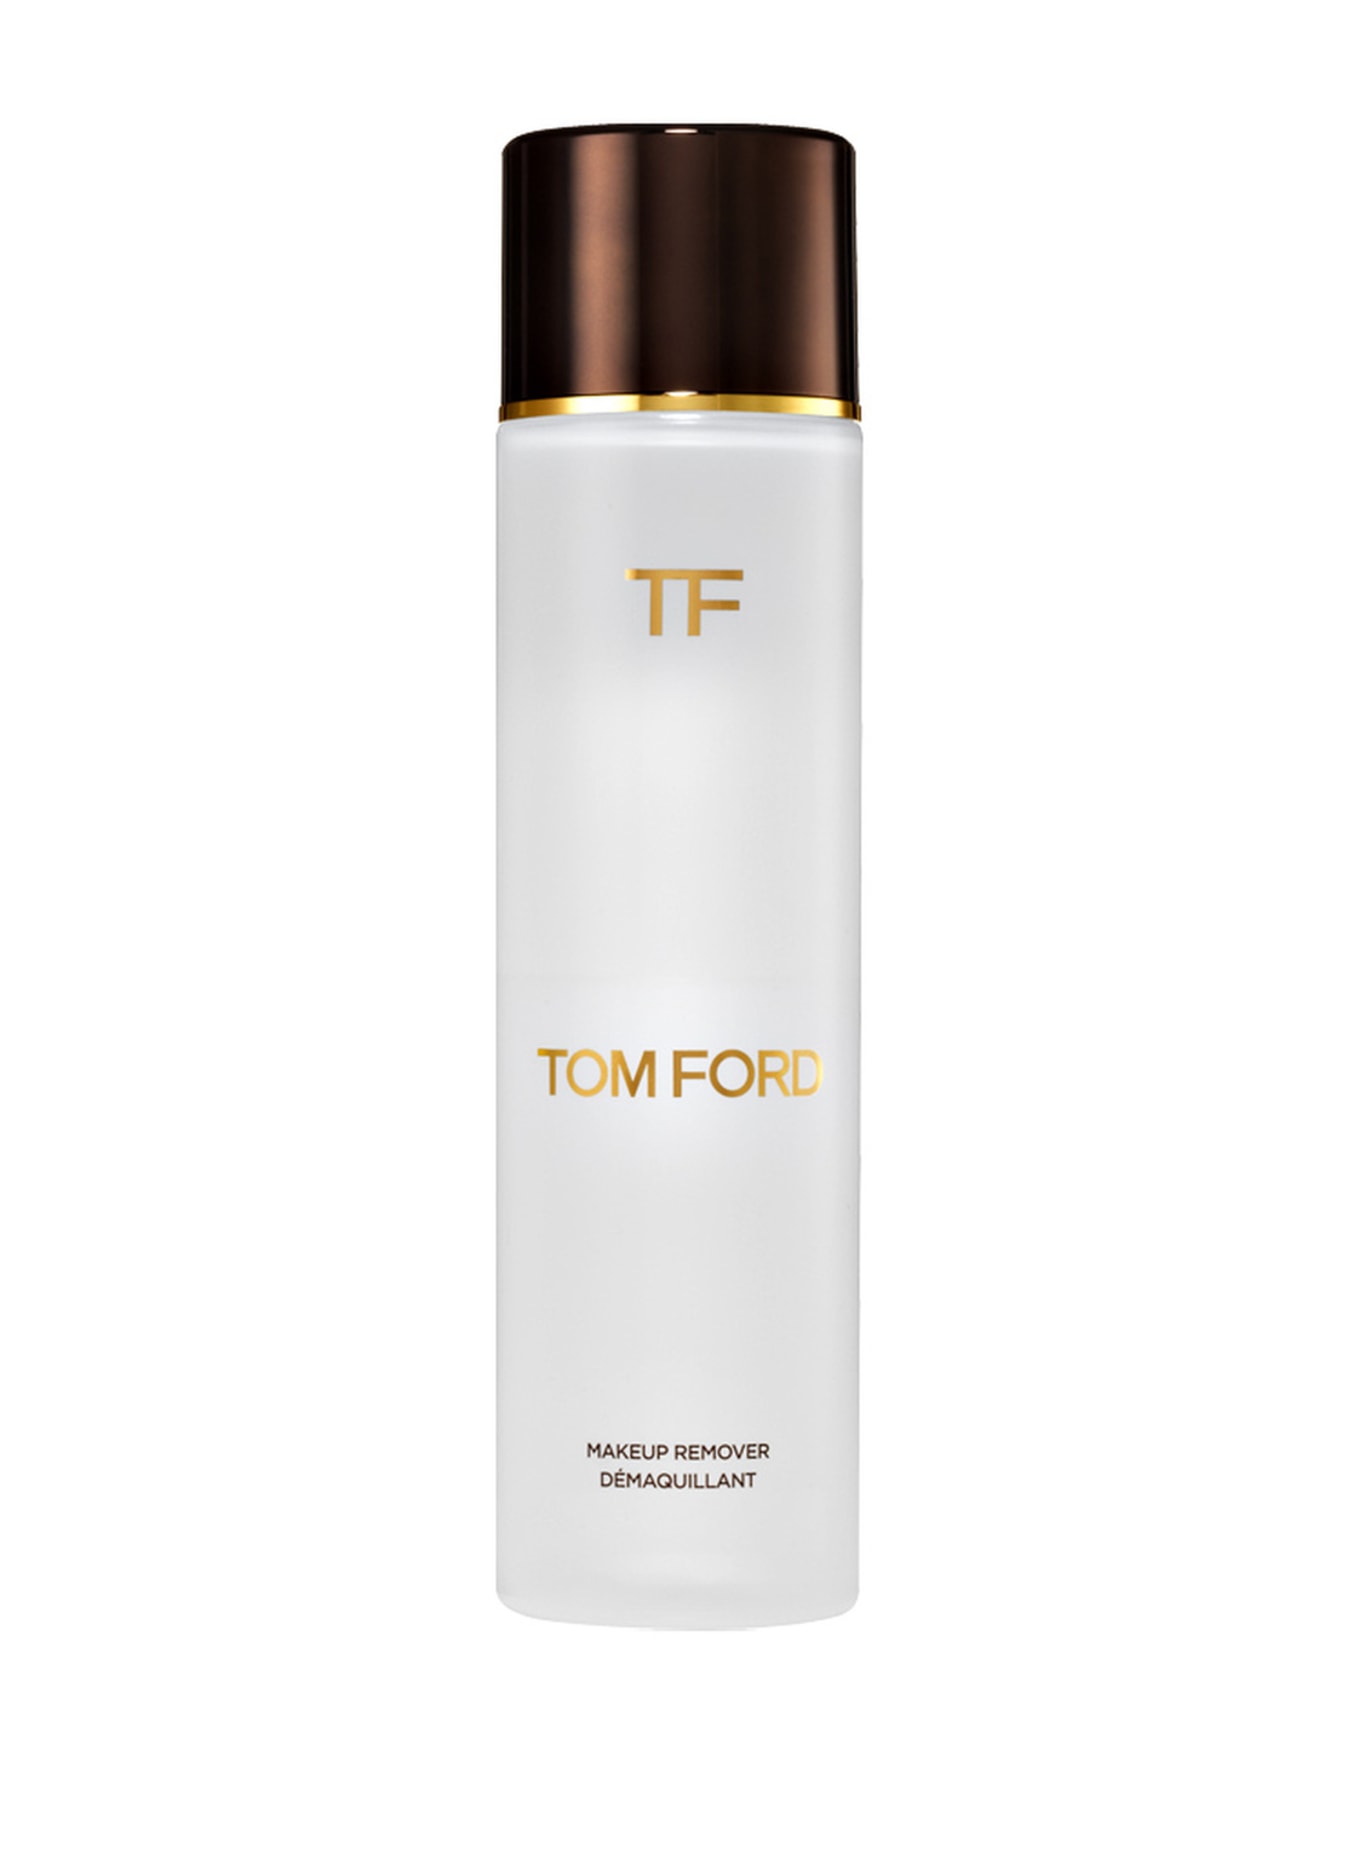 TOM FORD BEAUTY MAKEUP REMOVER (Bild 1)